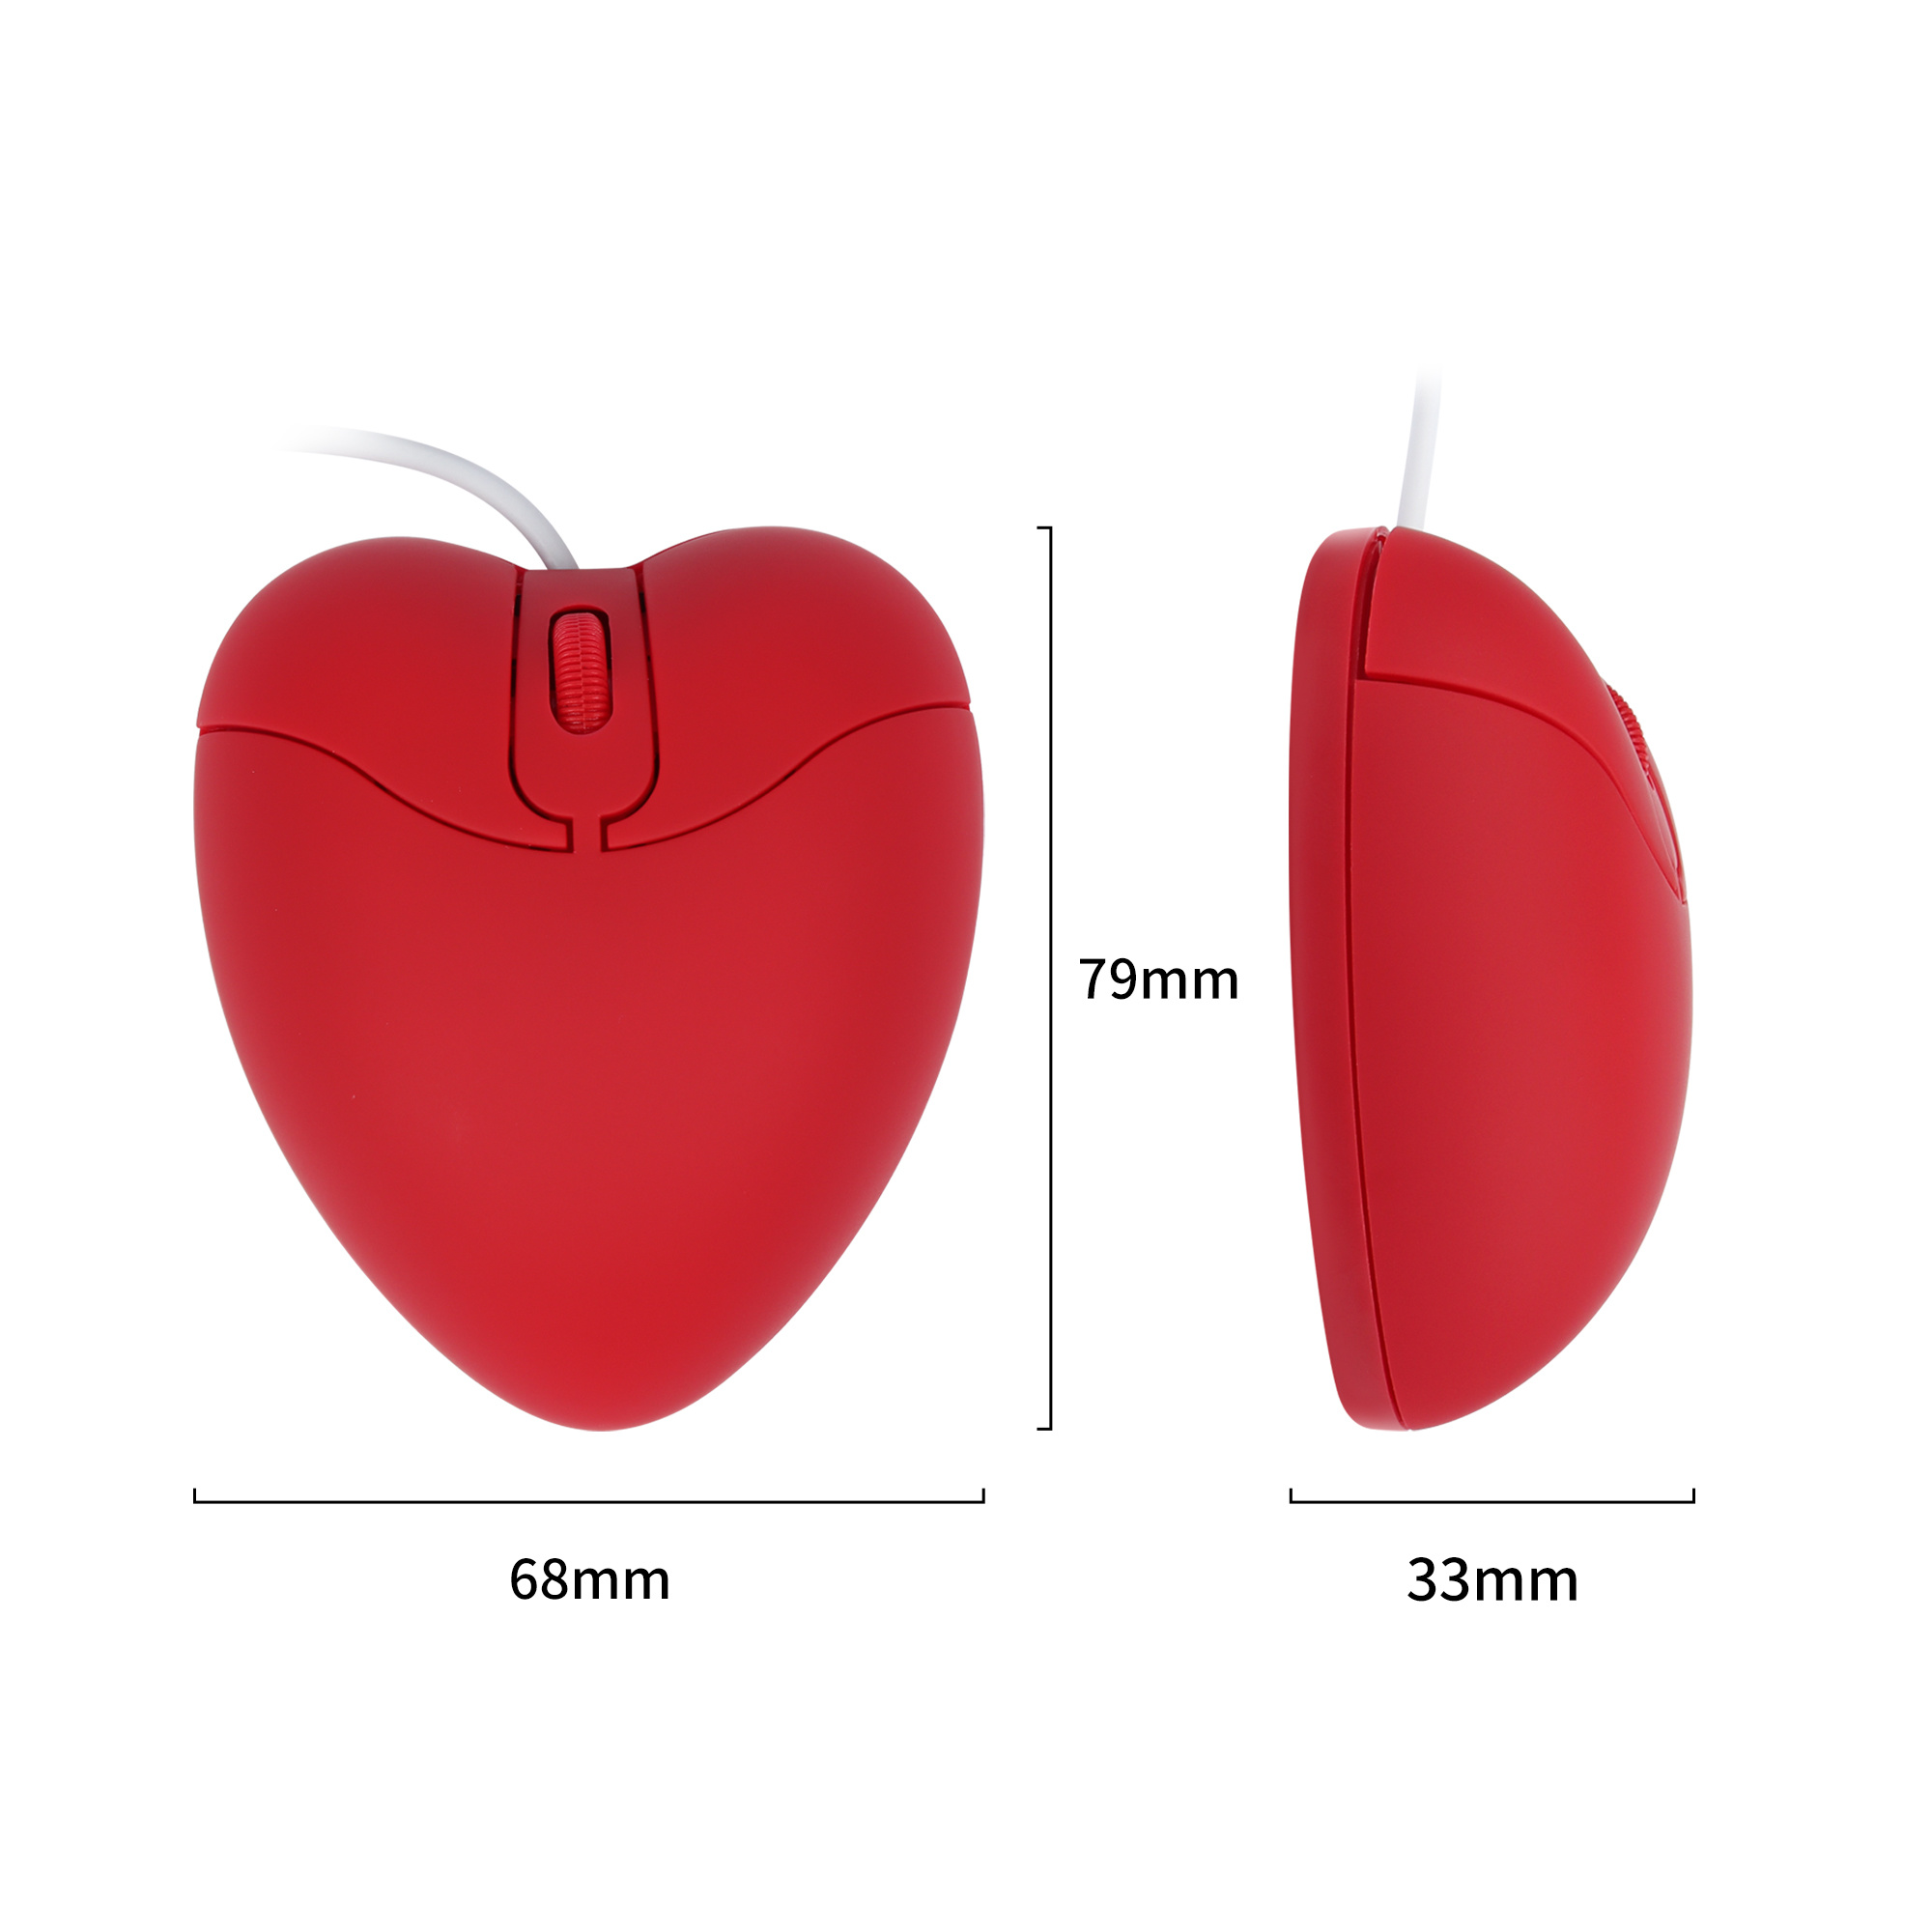 Kompjûter-Wired-Mûs-USB-Optical-Creative-Gaming-Cute-Mause-Ergonomysk-Love-Heart-3D-Mice-For-Laptop (4)